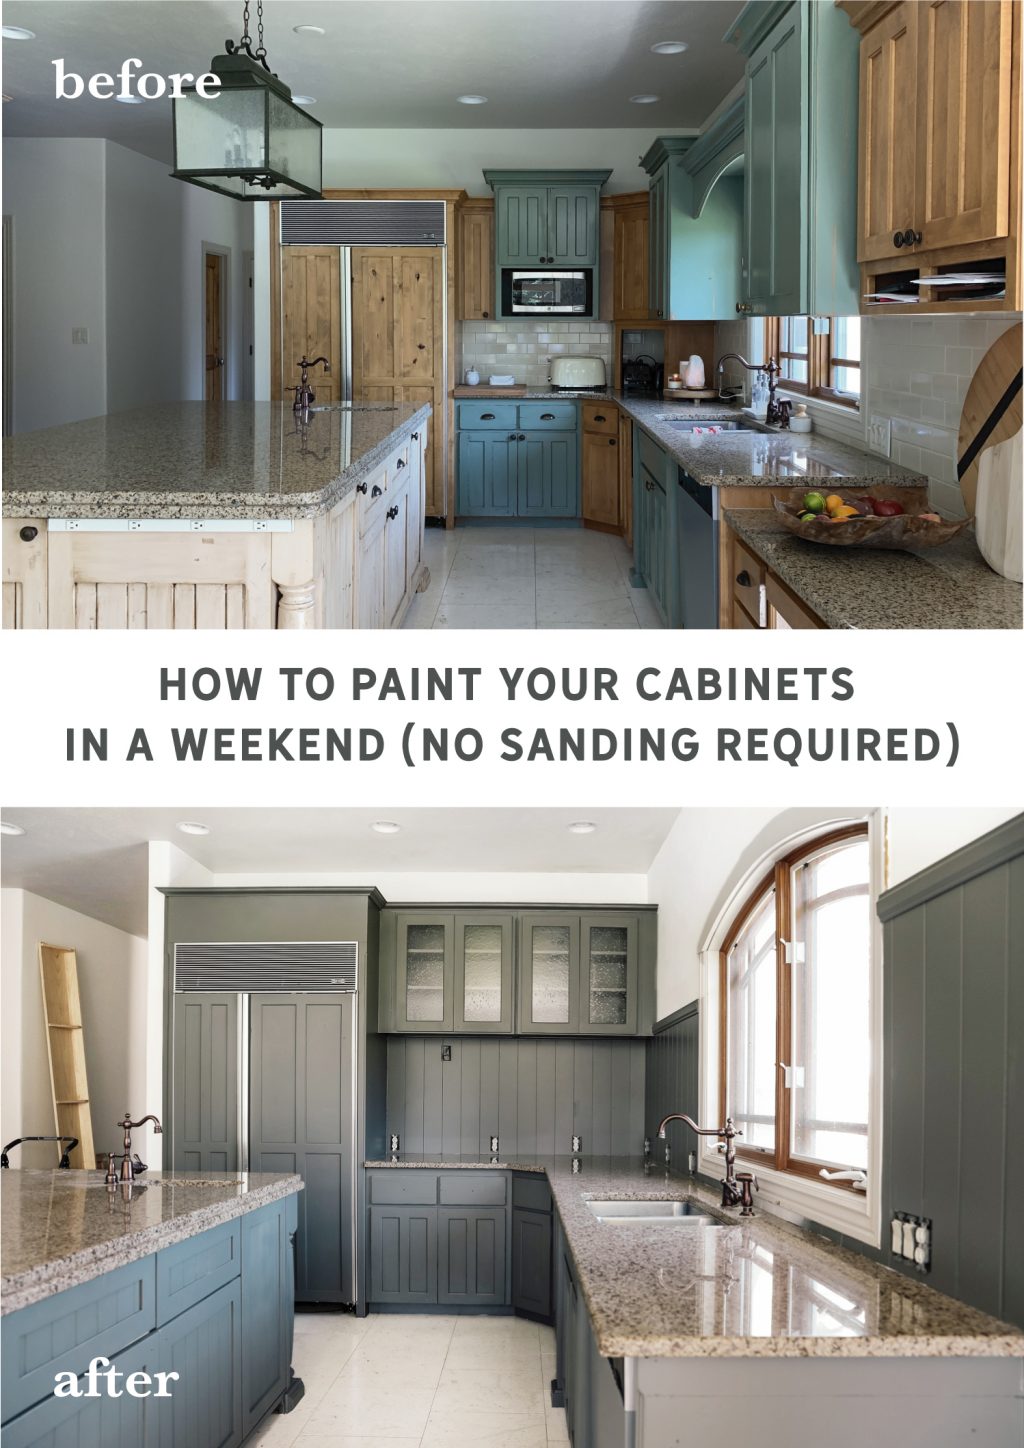 HOW TO PAINT YOUR CABINETS IN A WEEKEND WITHOUT SANDING THEM ...